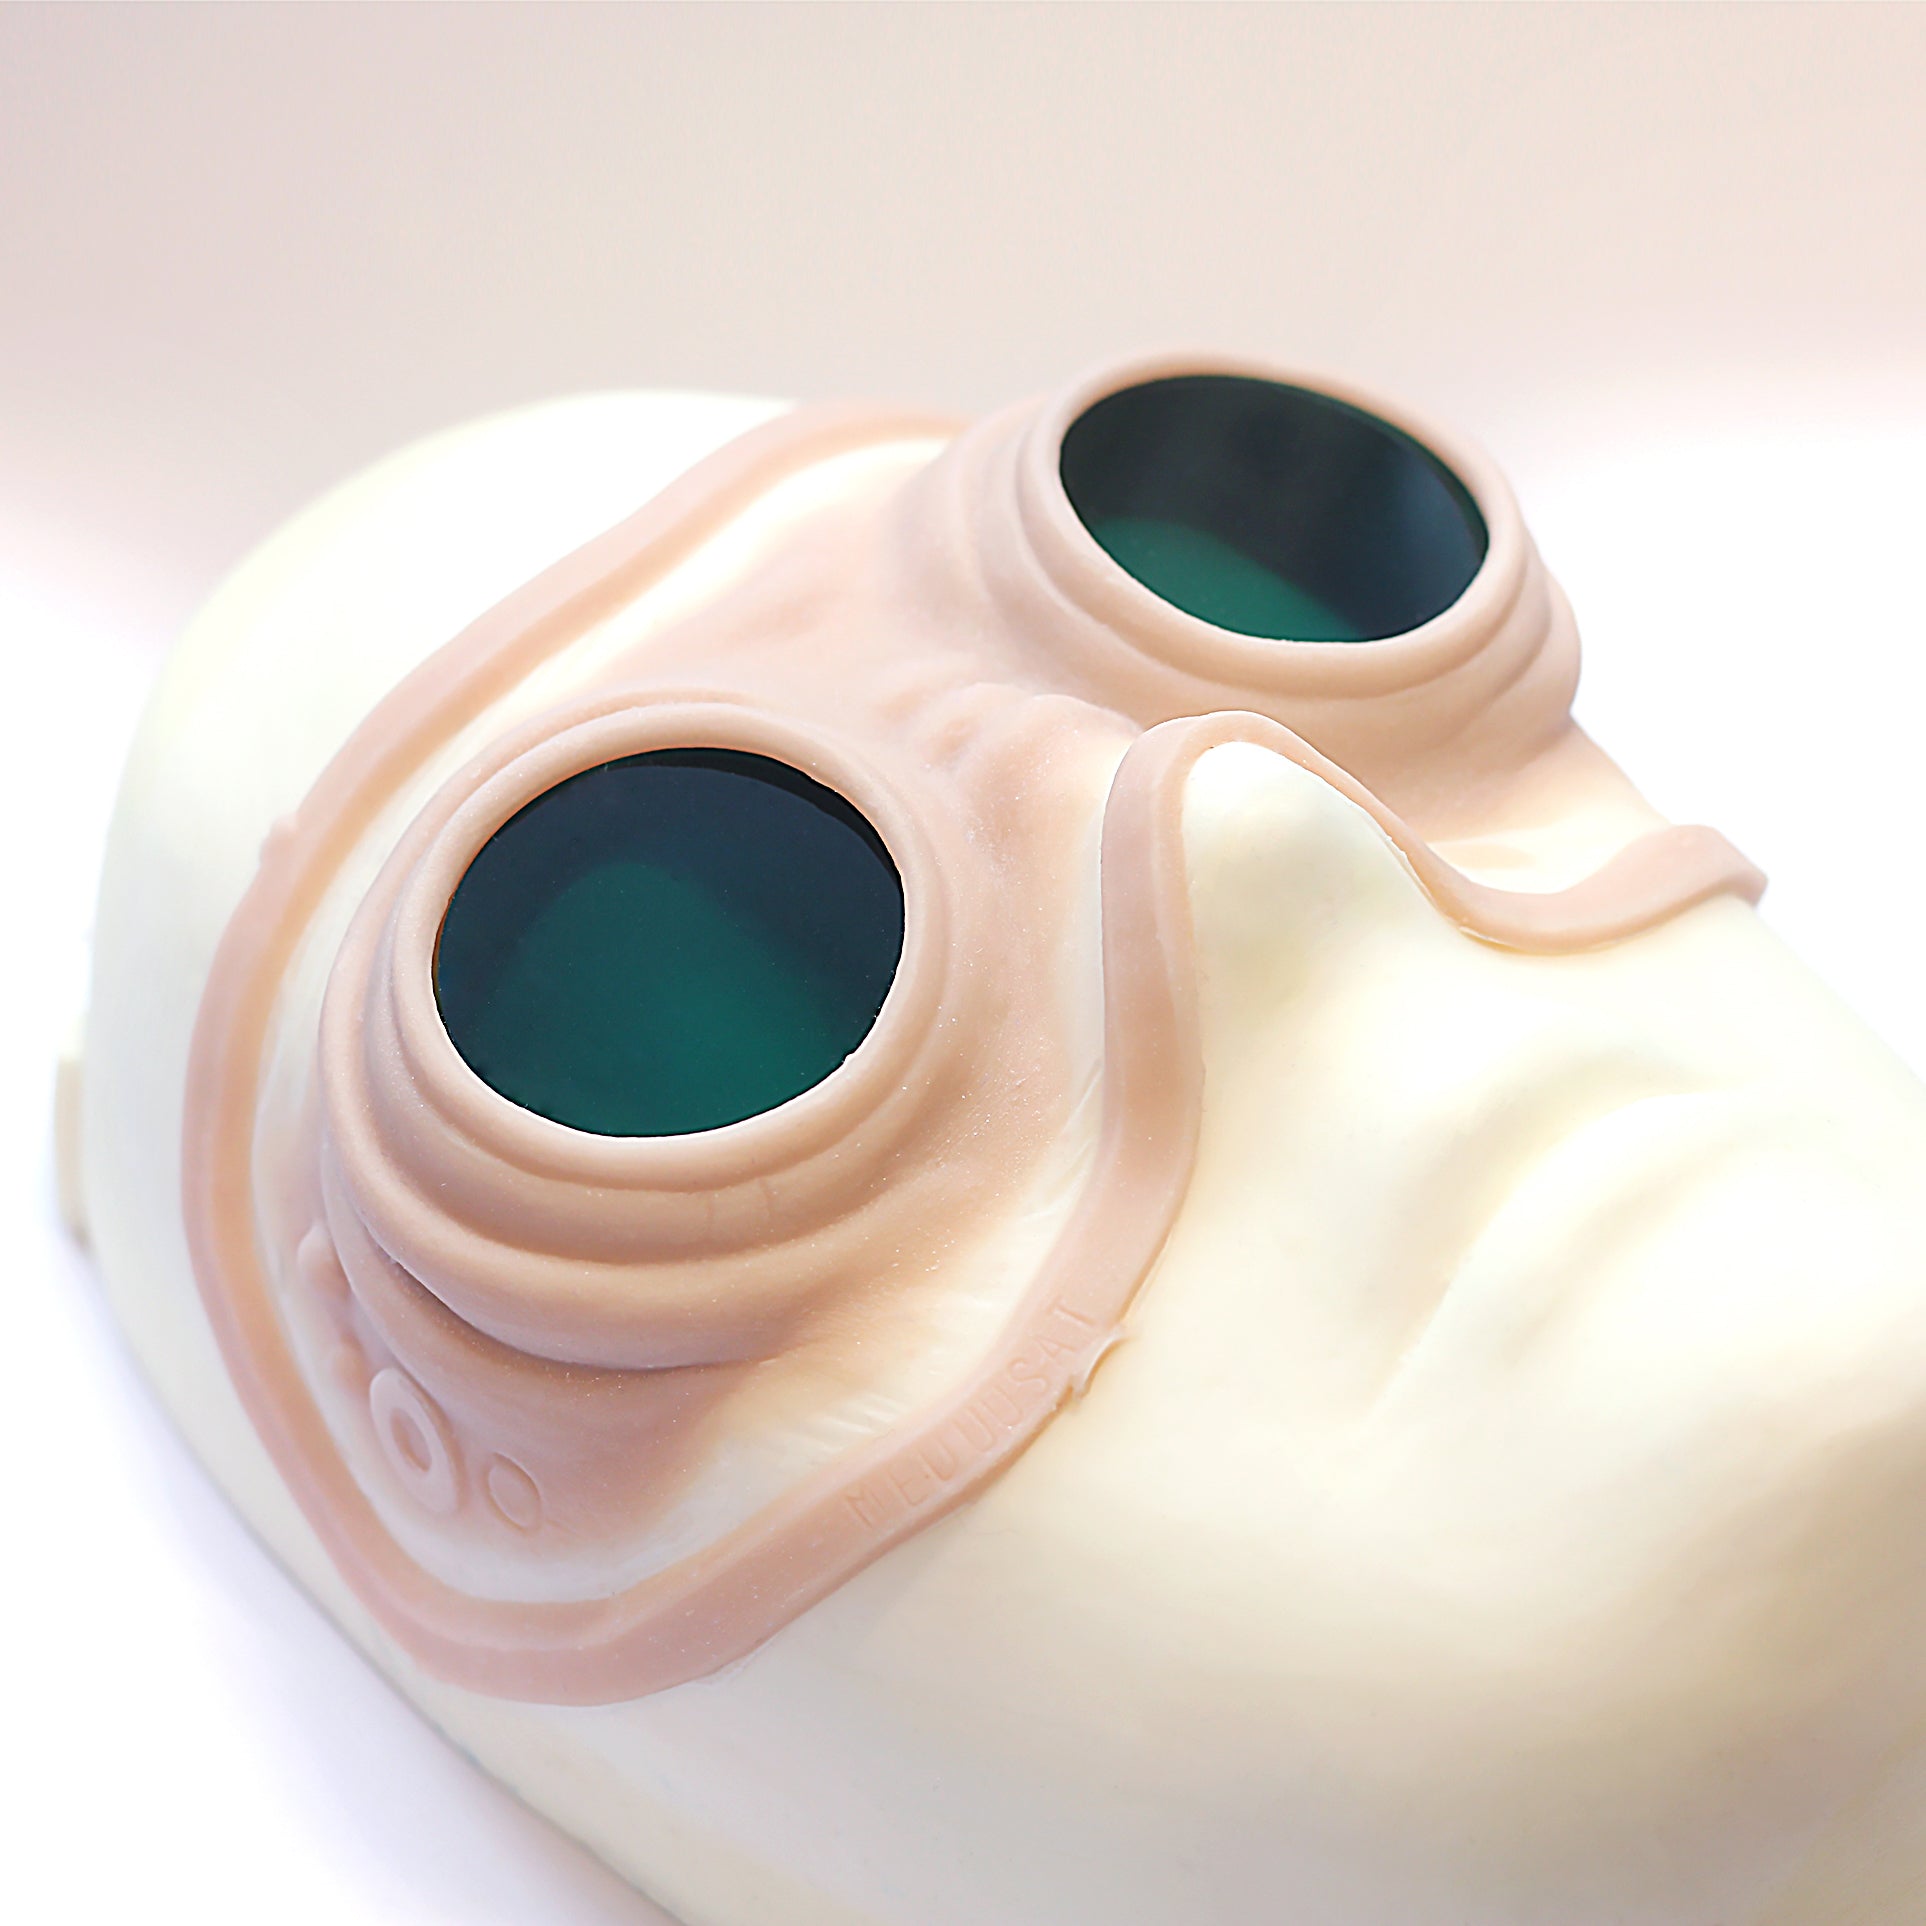 Steampunk Goggles - Silicone makeup prosthetic in vanilla shade on a white surface